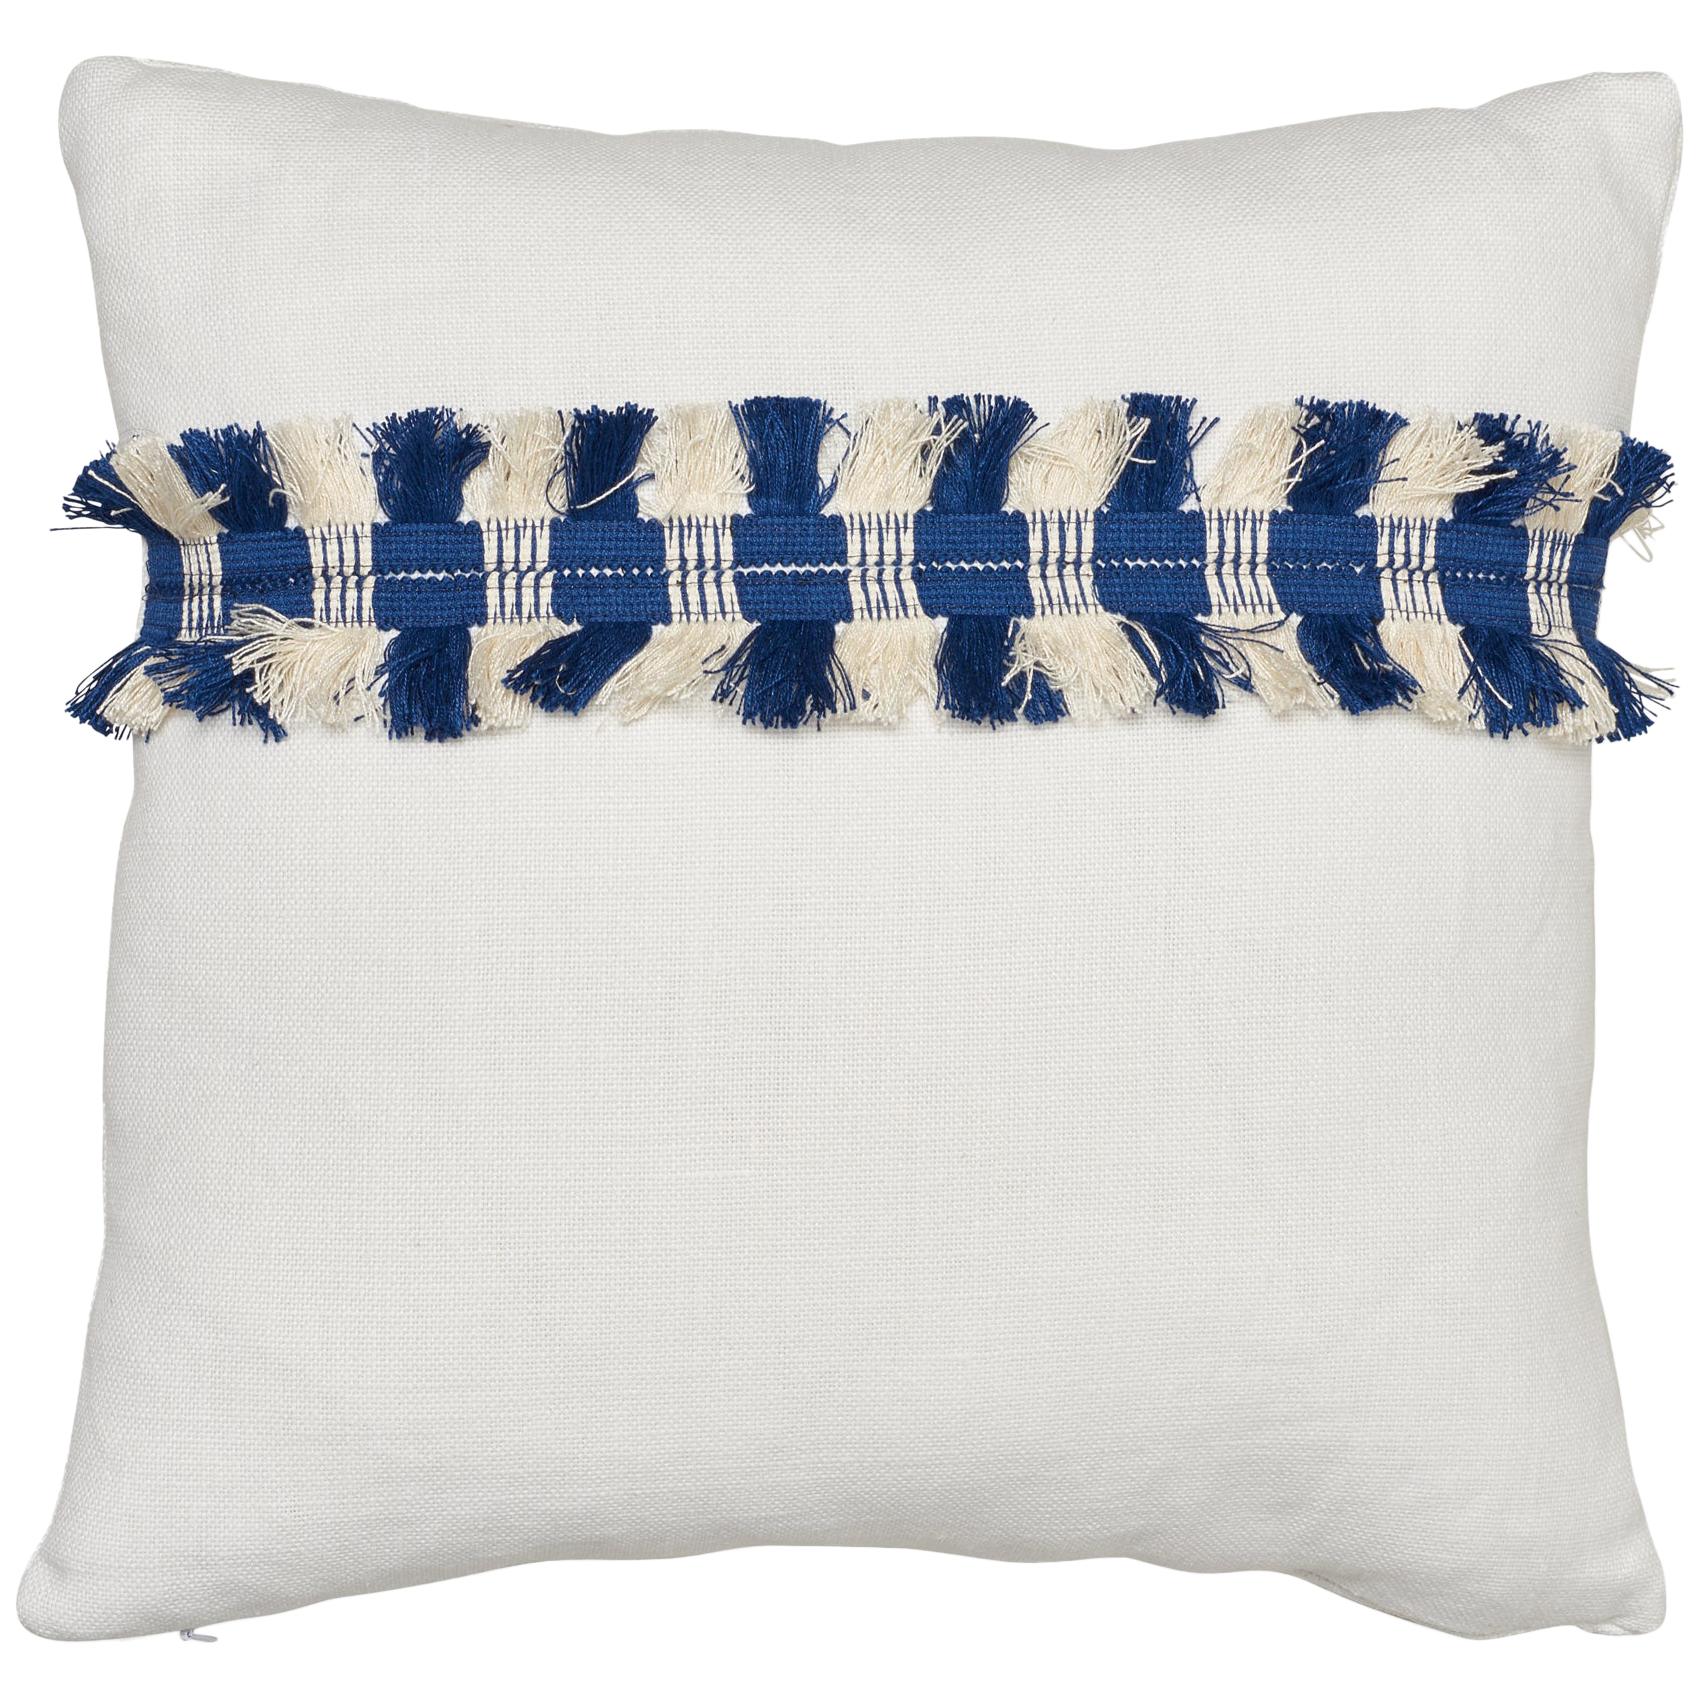 Schumacher Piet Performance Linen Blanc Two-Sided Pillow with Juno Fringe Tape